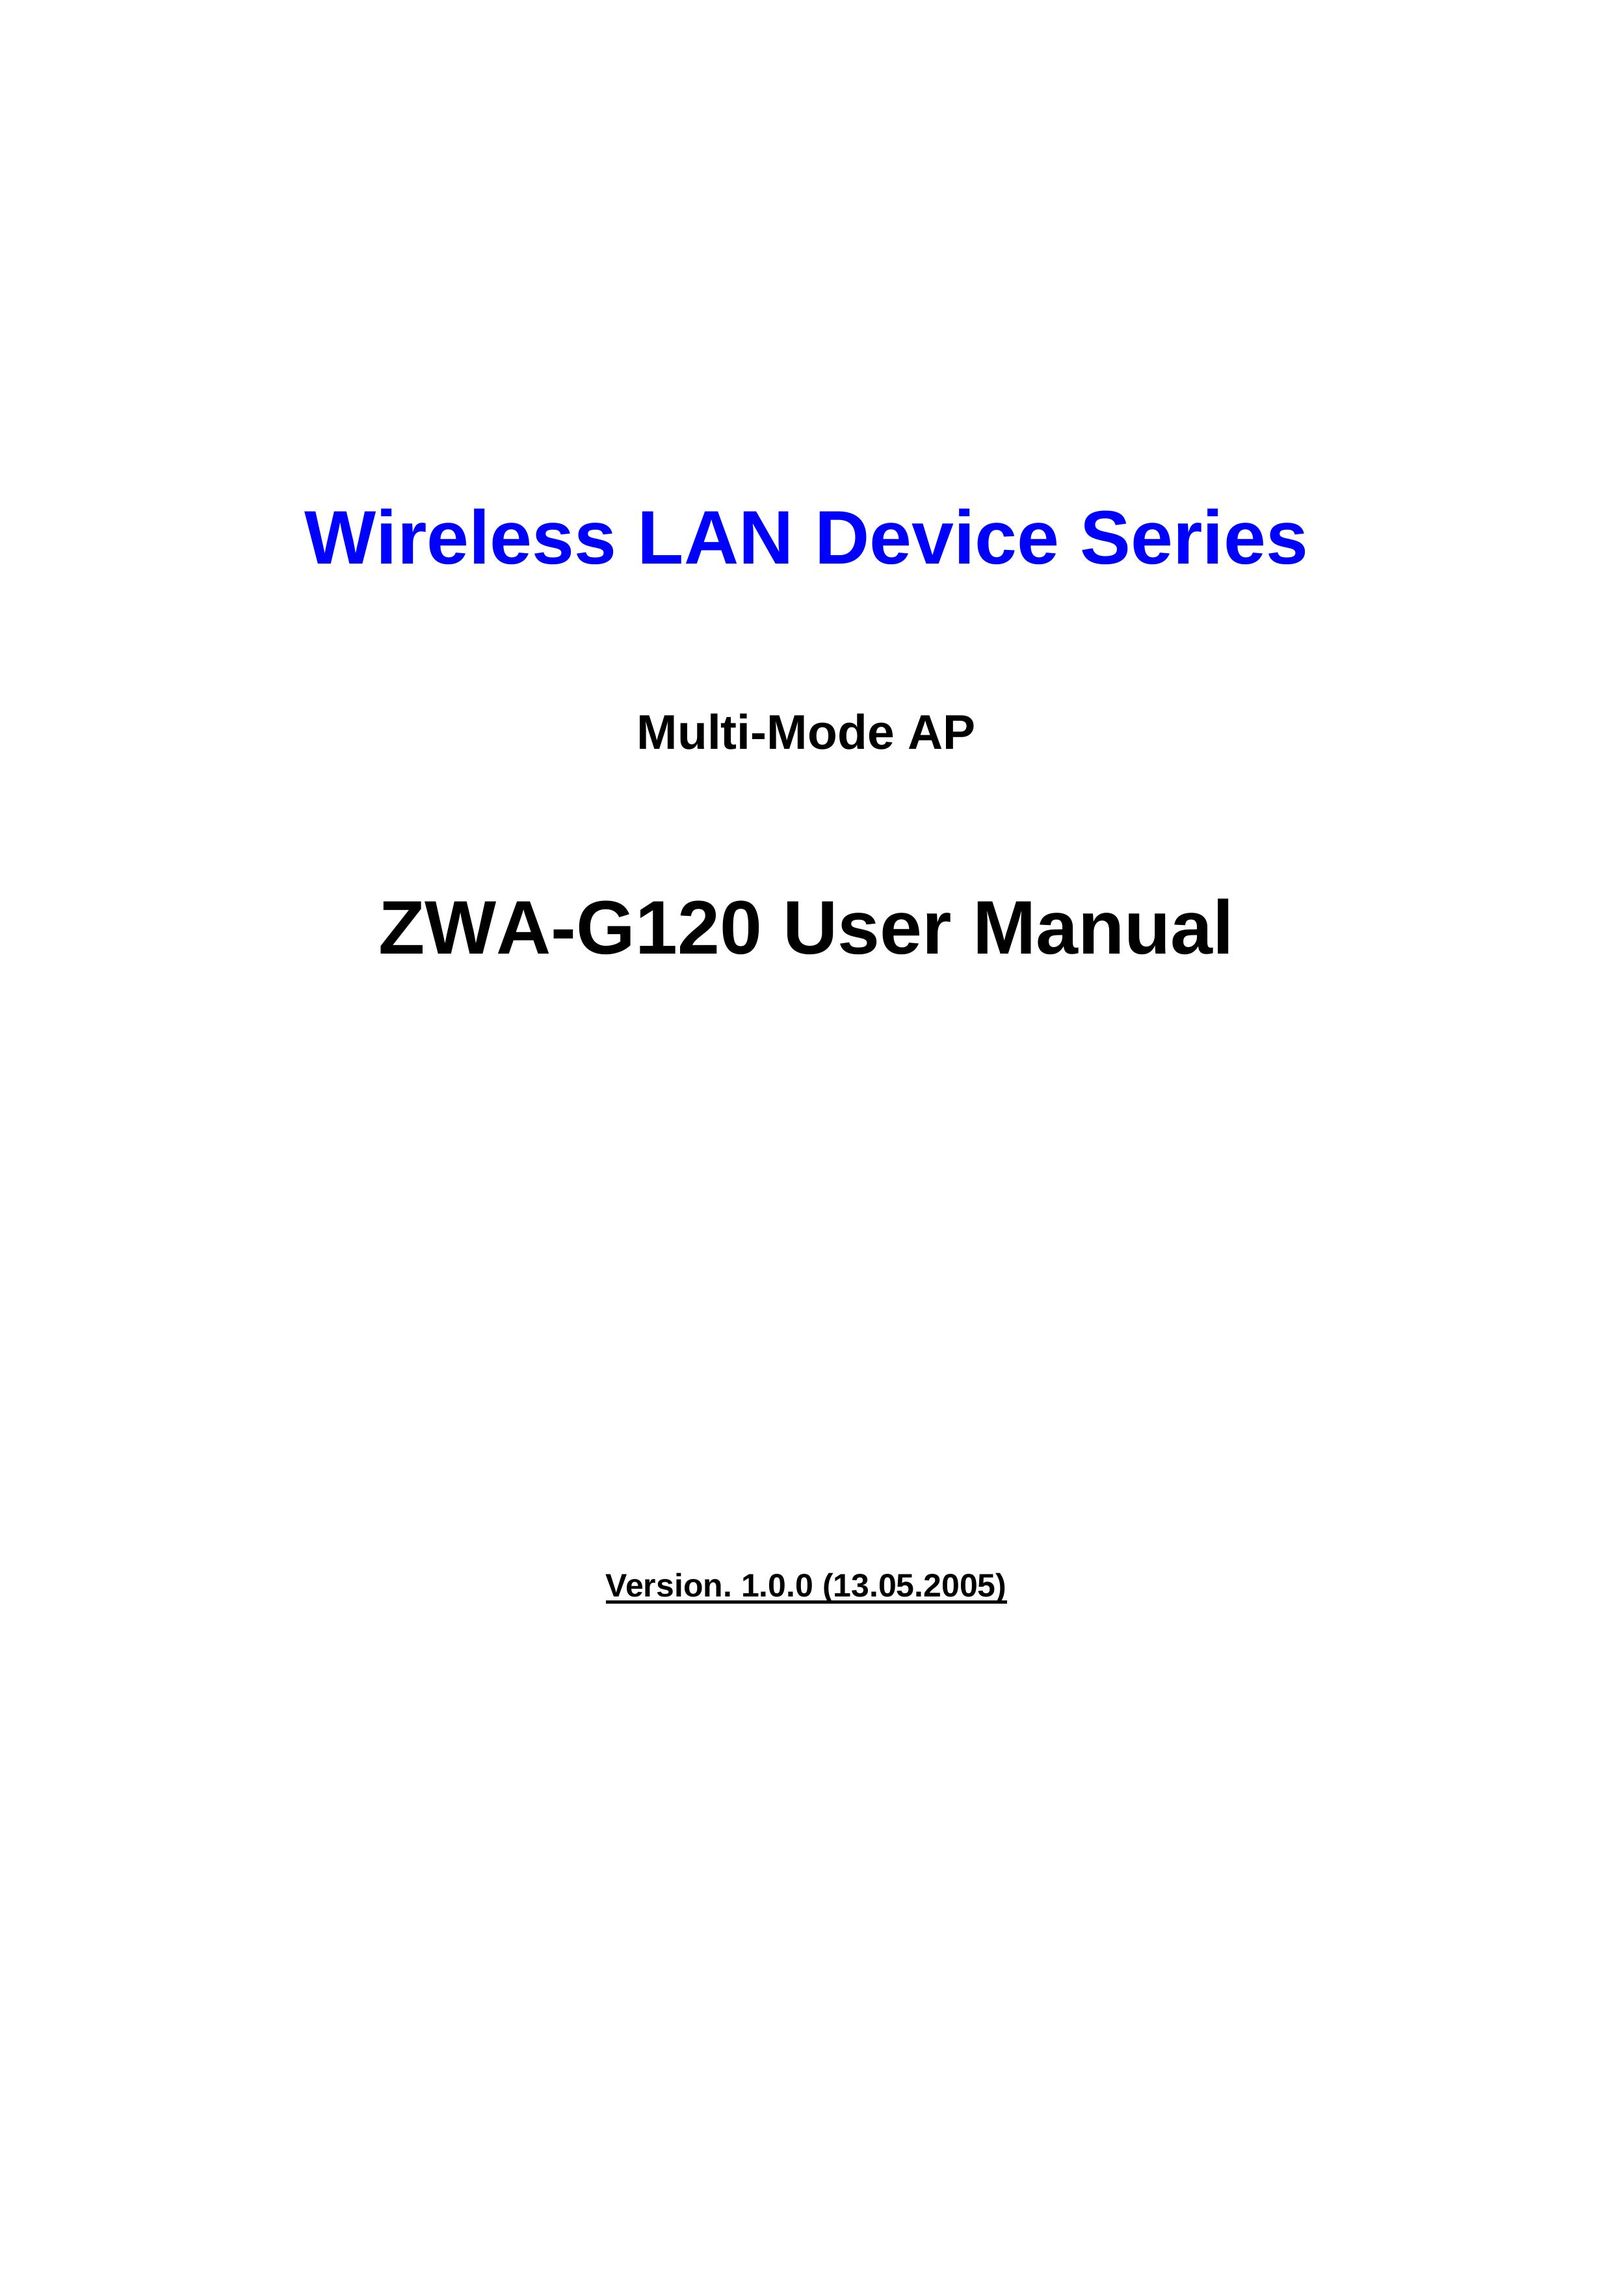 Nlynx ZWA-G120 Network Router User Manual